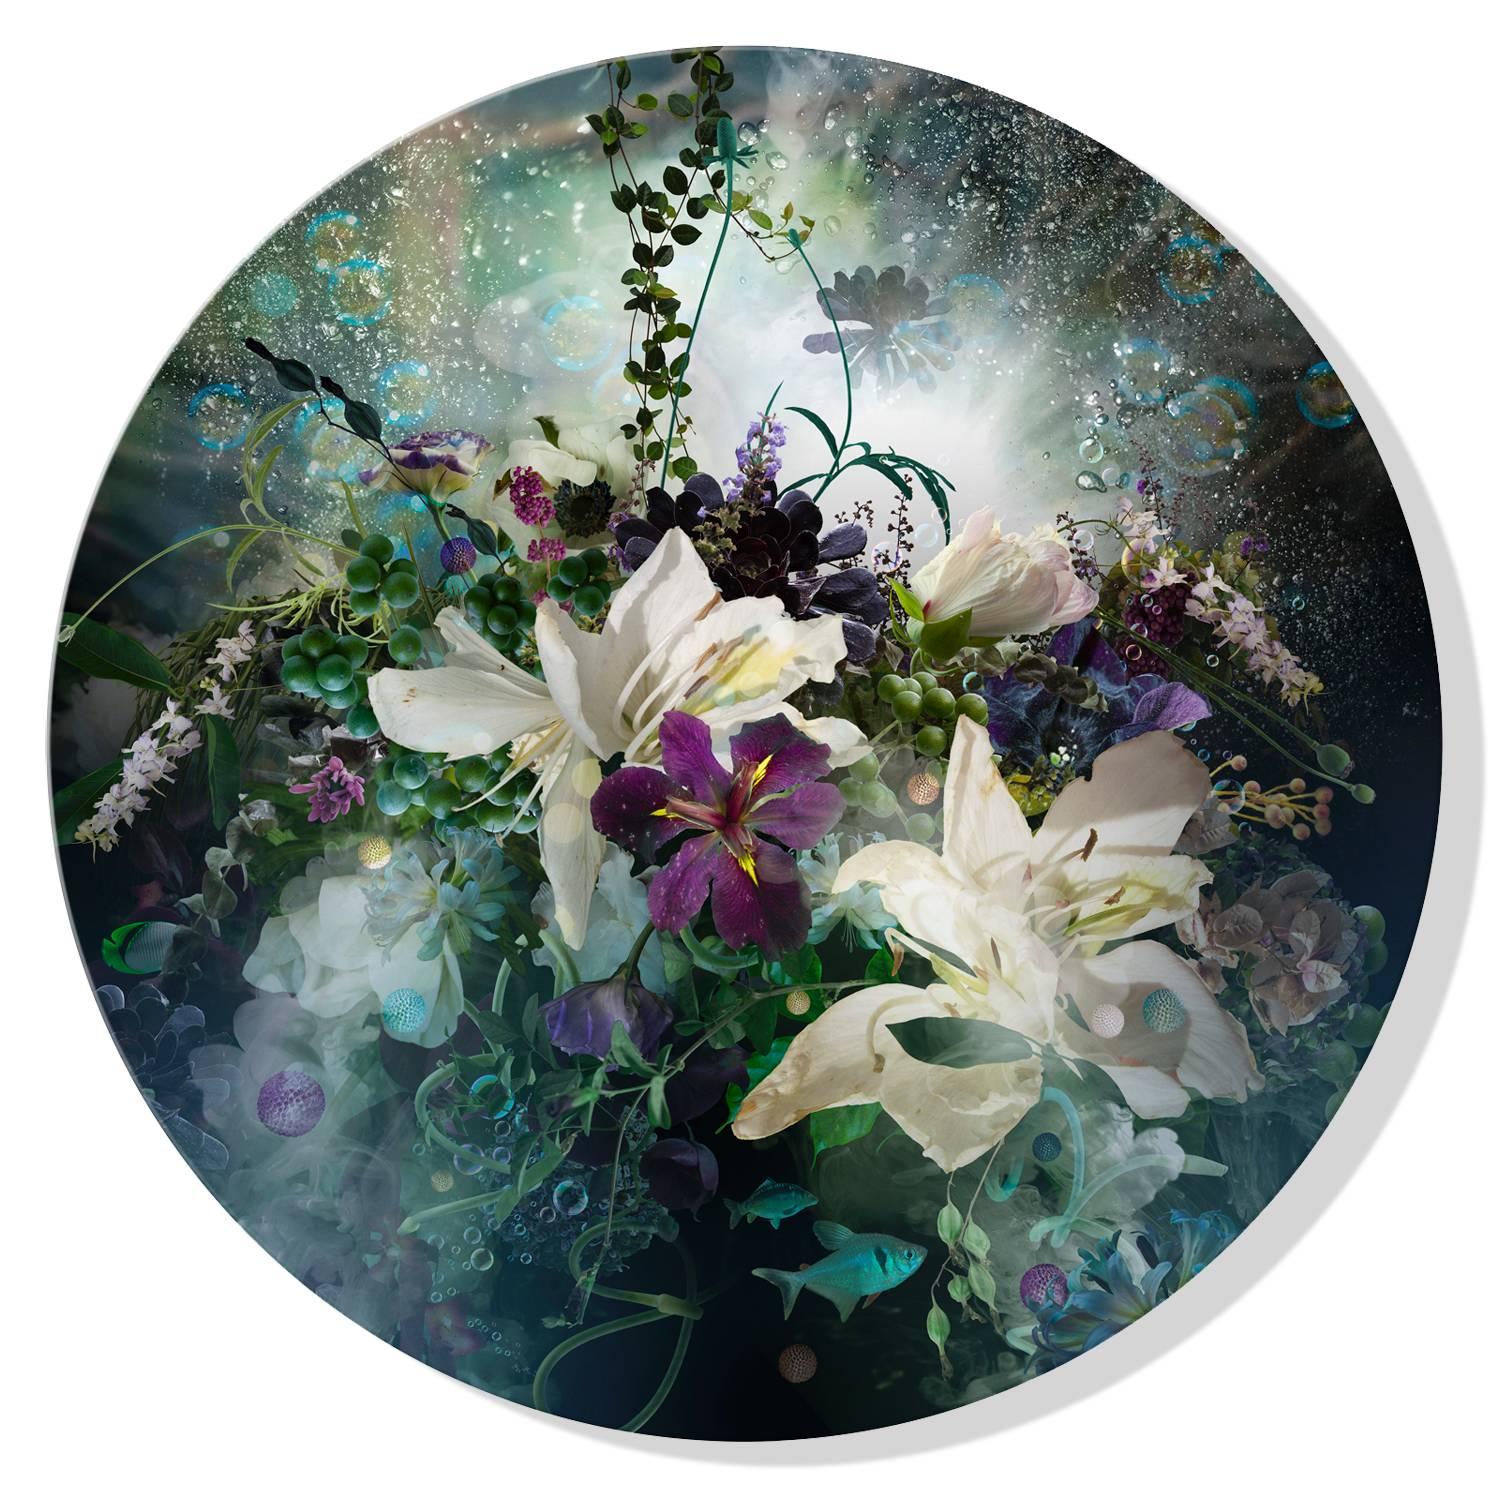 Ysabel Le May Abstract Photograph - Dreamlike underwater floral composition with fish